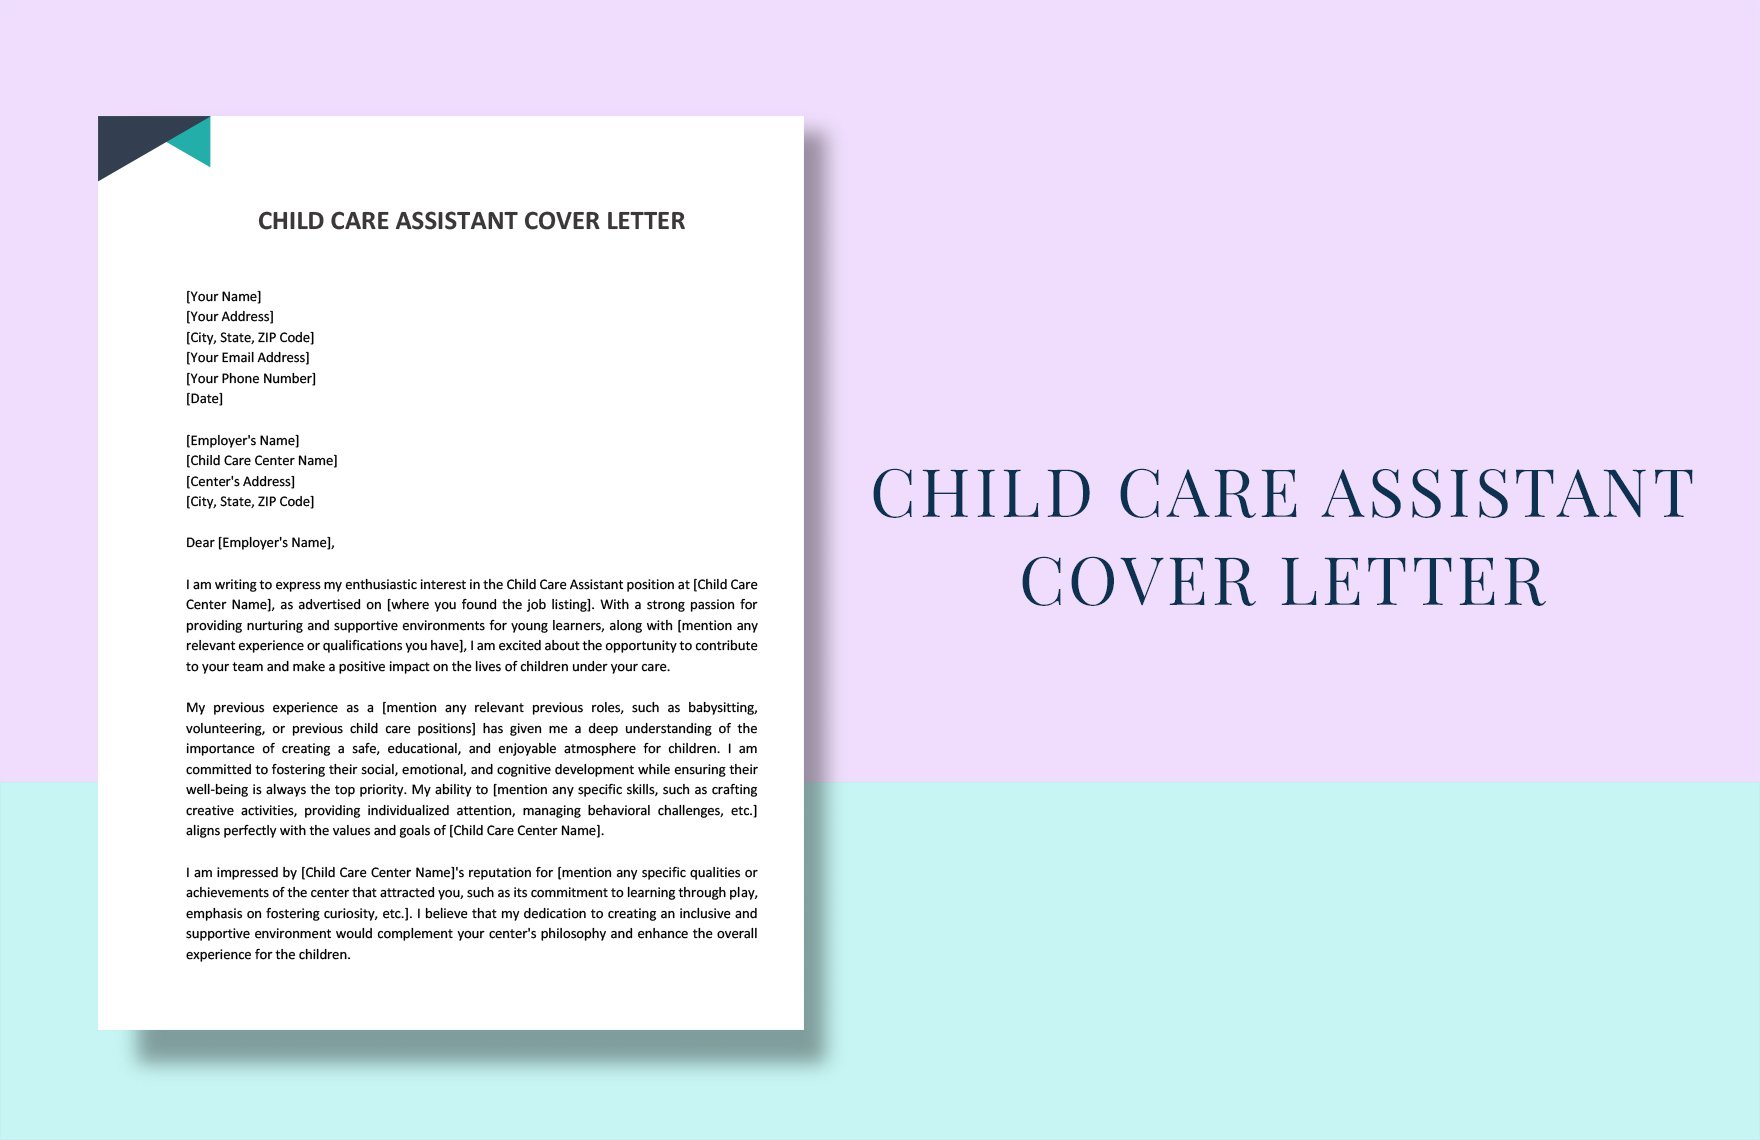 Child Care Assistant Cover Letter in Word, Google Docs, PDF